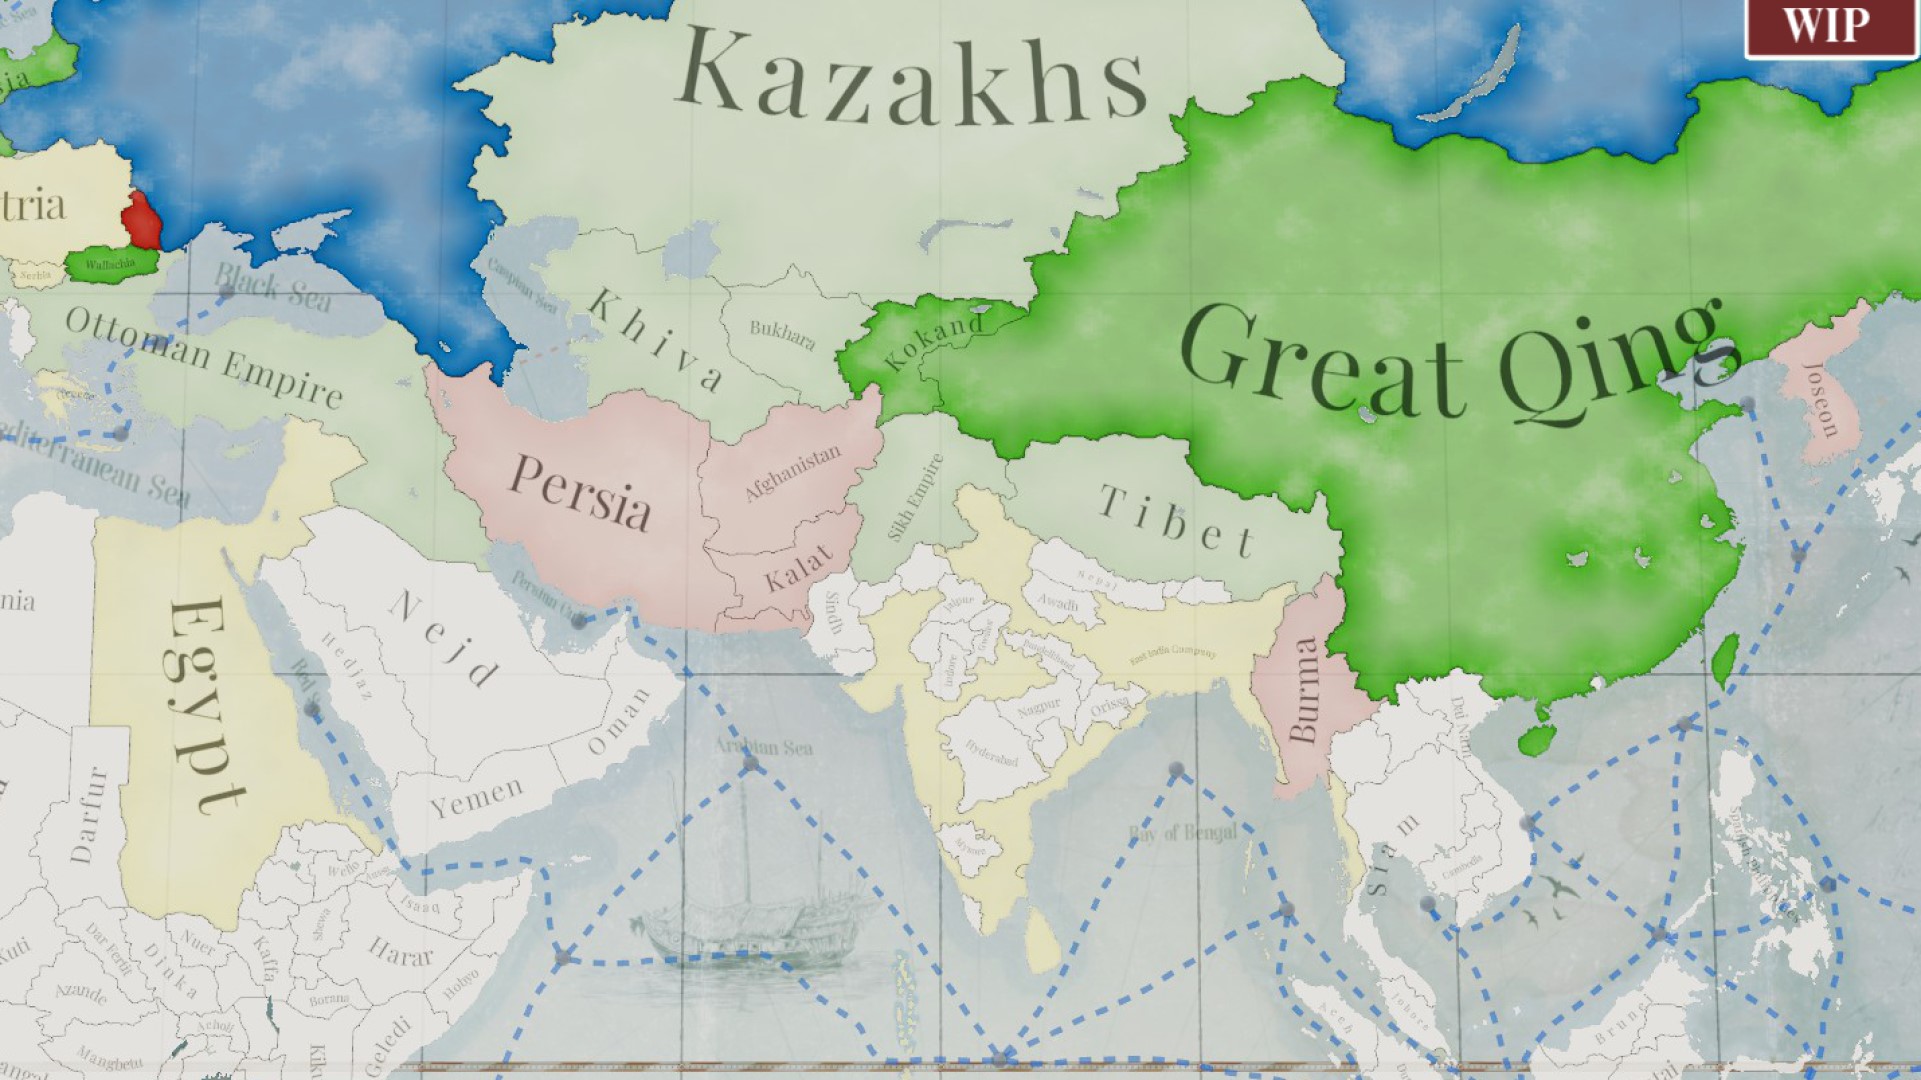 Victoria 3 will use Crusader Kings 3’s tooltip system so you don’t need an econ degree